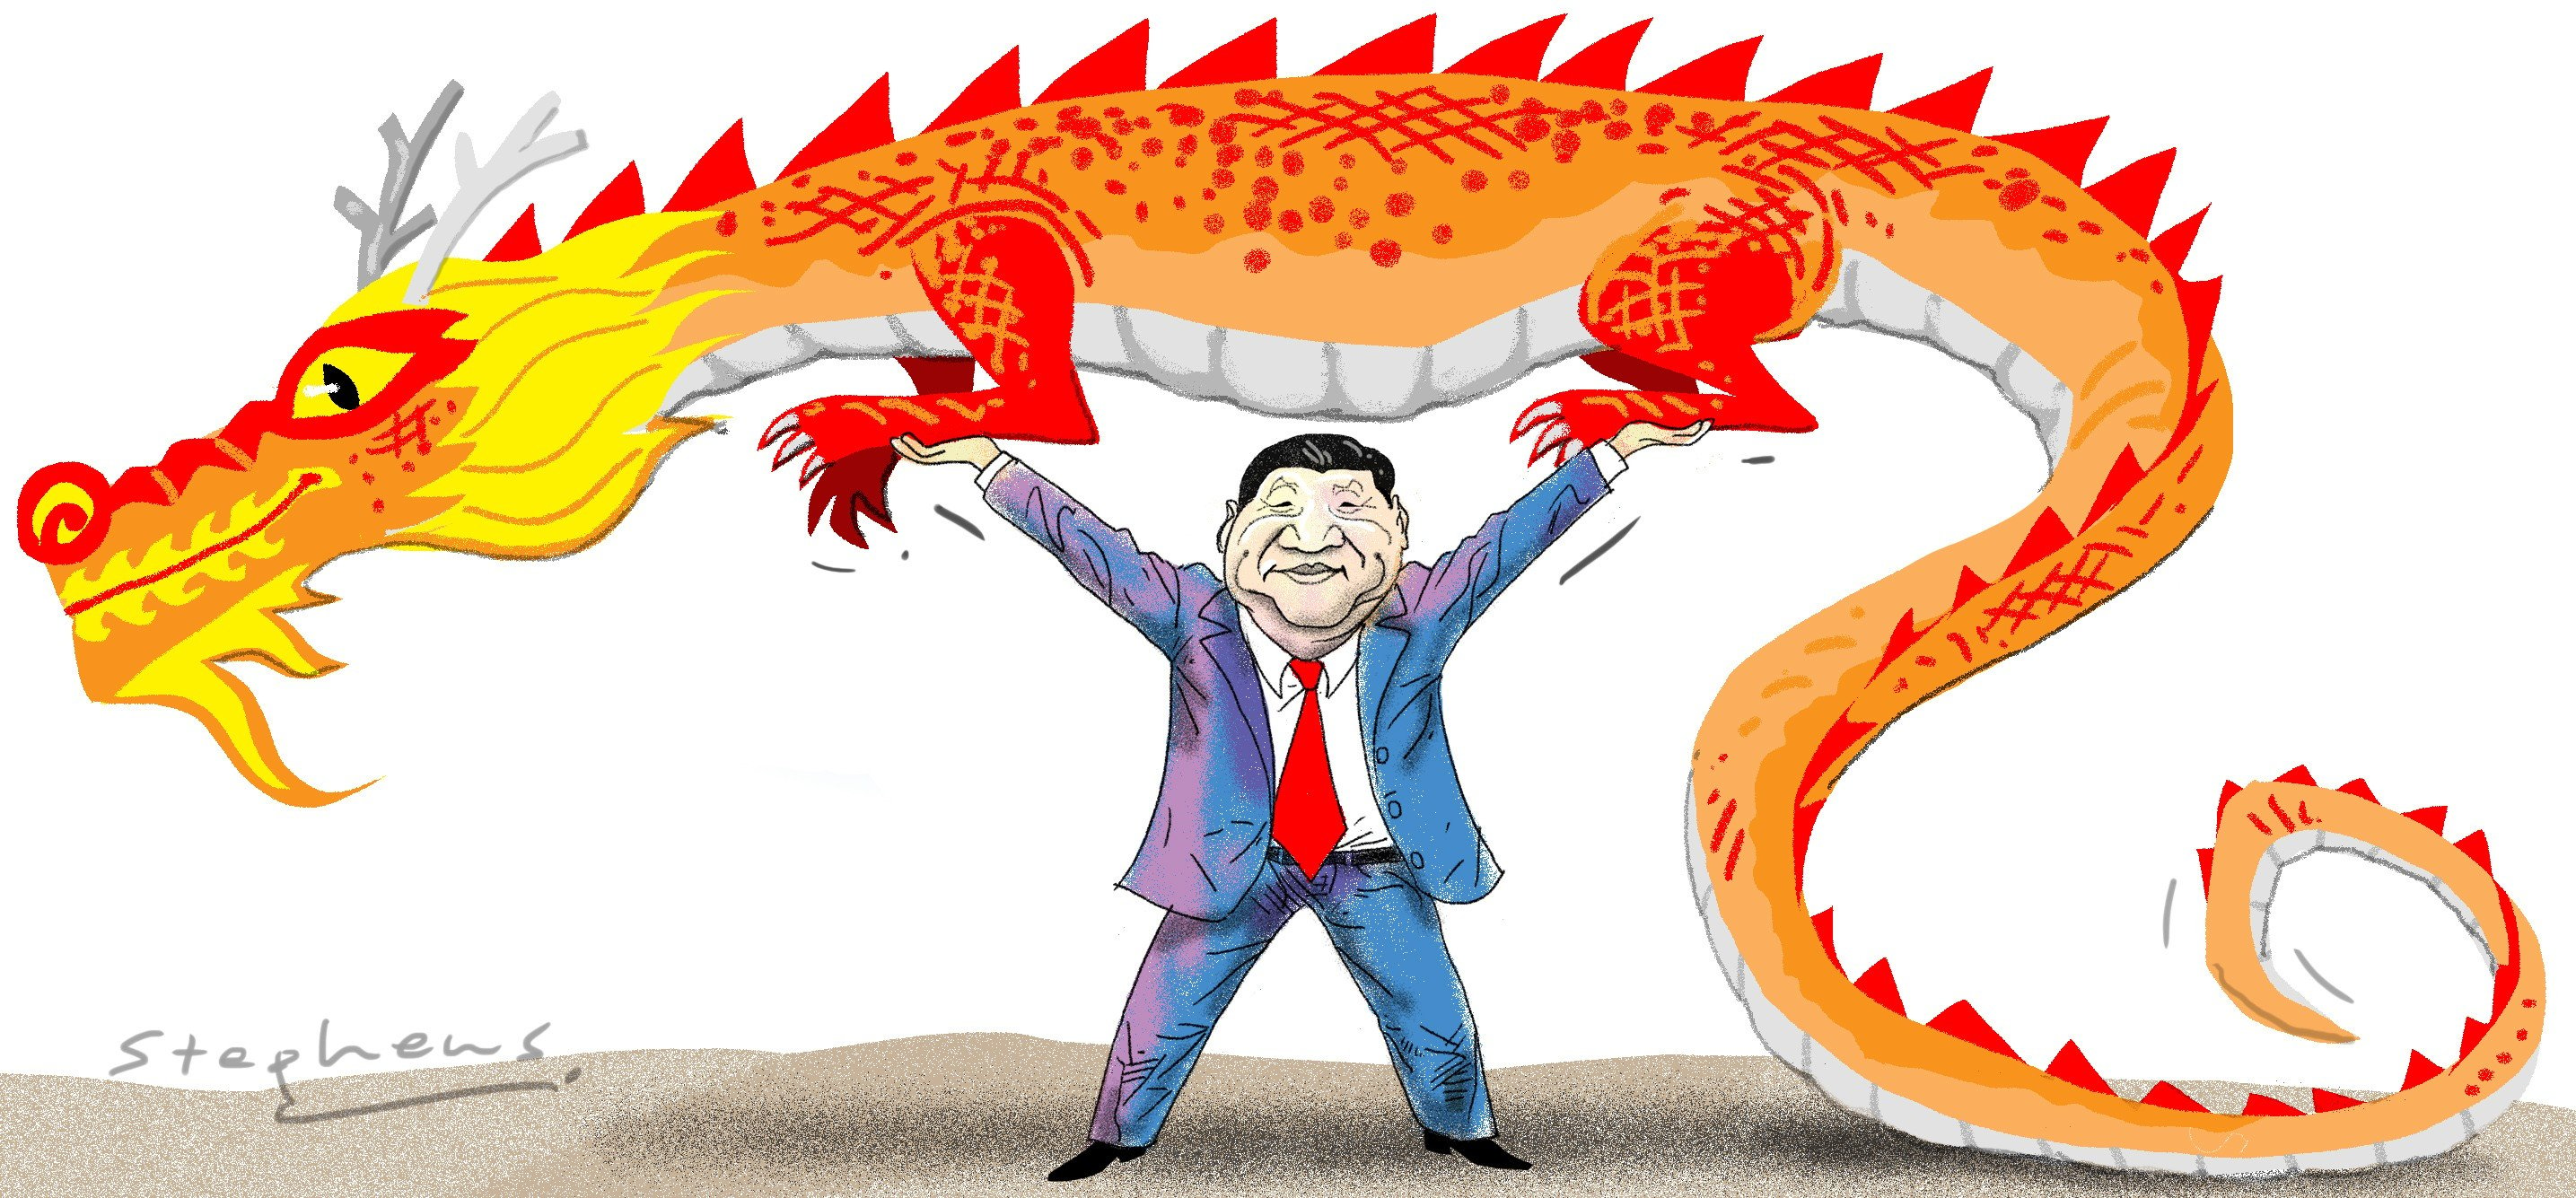 It does not seem like mere coincidence that large changes in China’s trajectory as a country coincide with strong leaders. Illustration: Craig Stephens